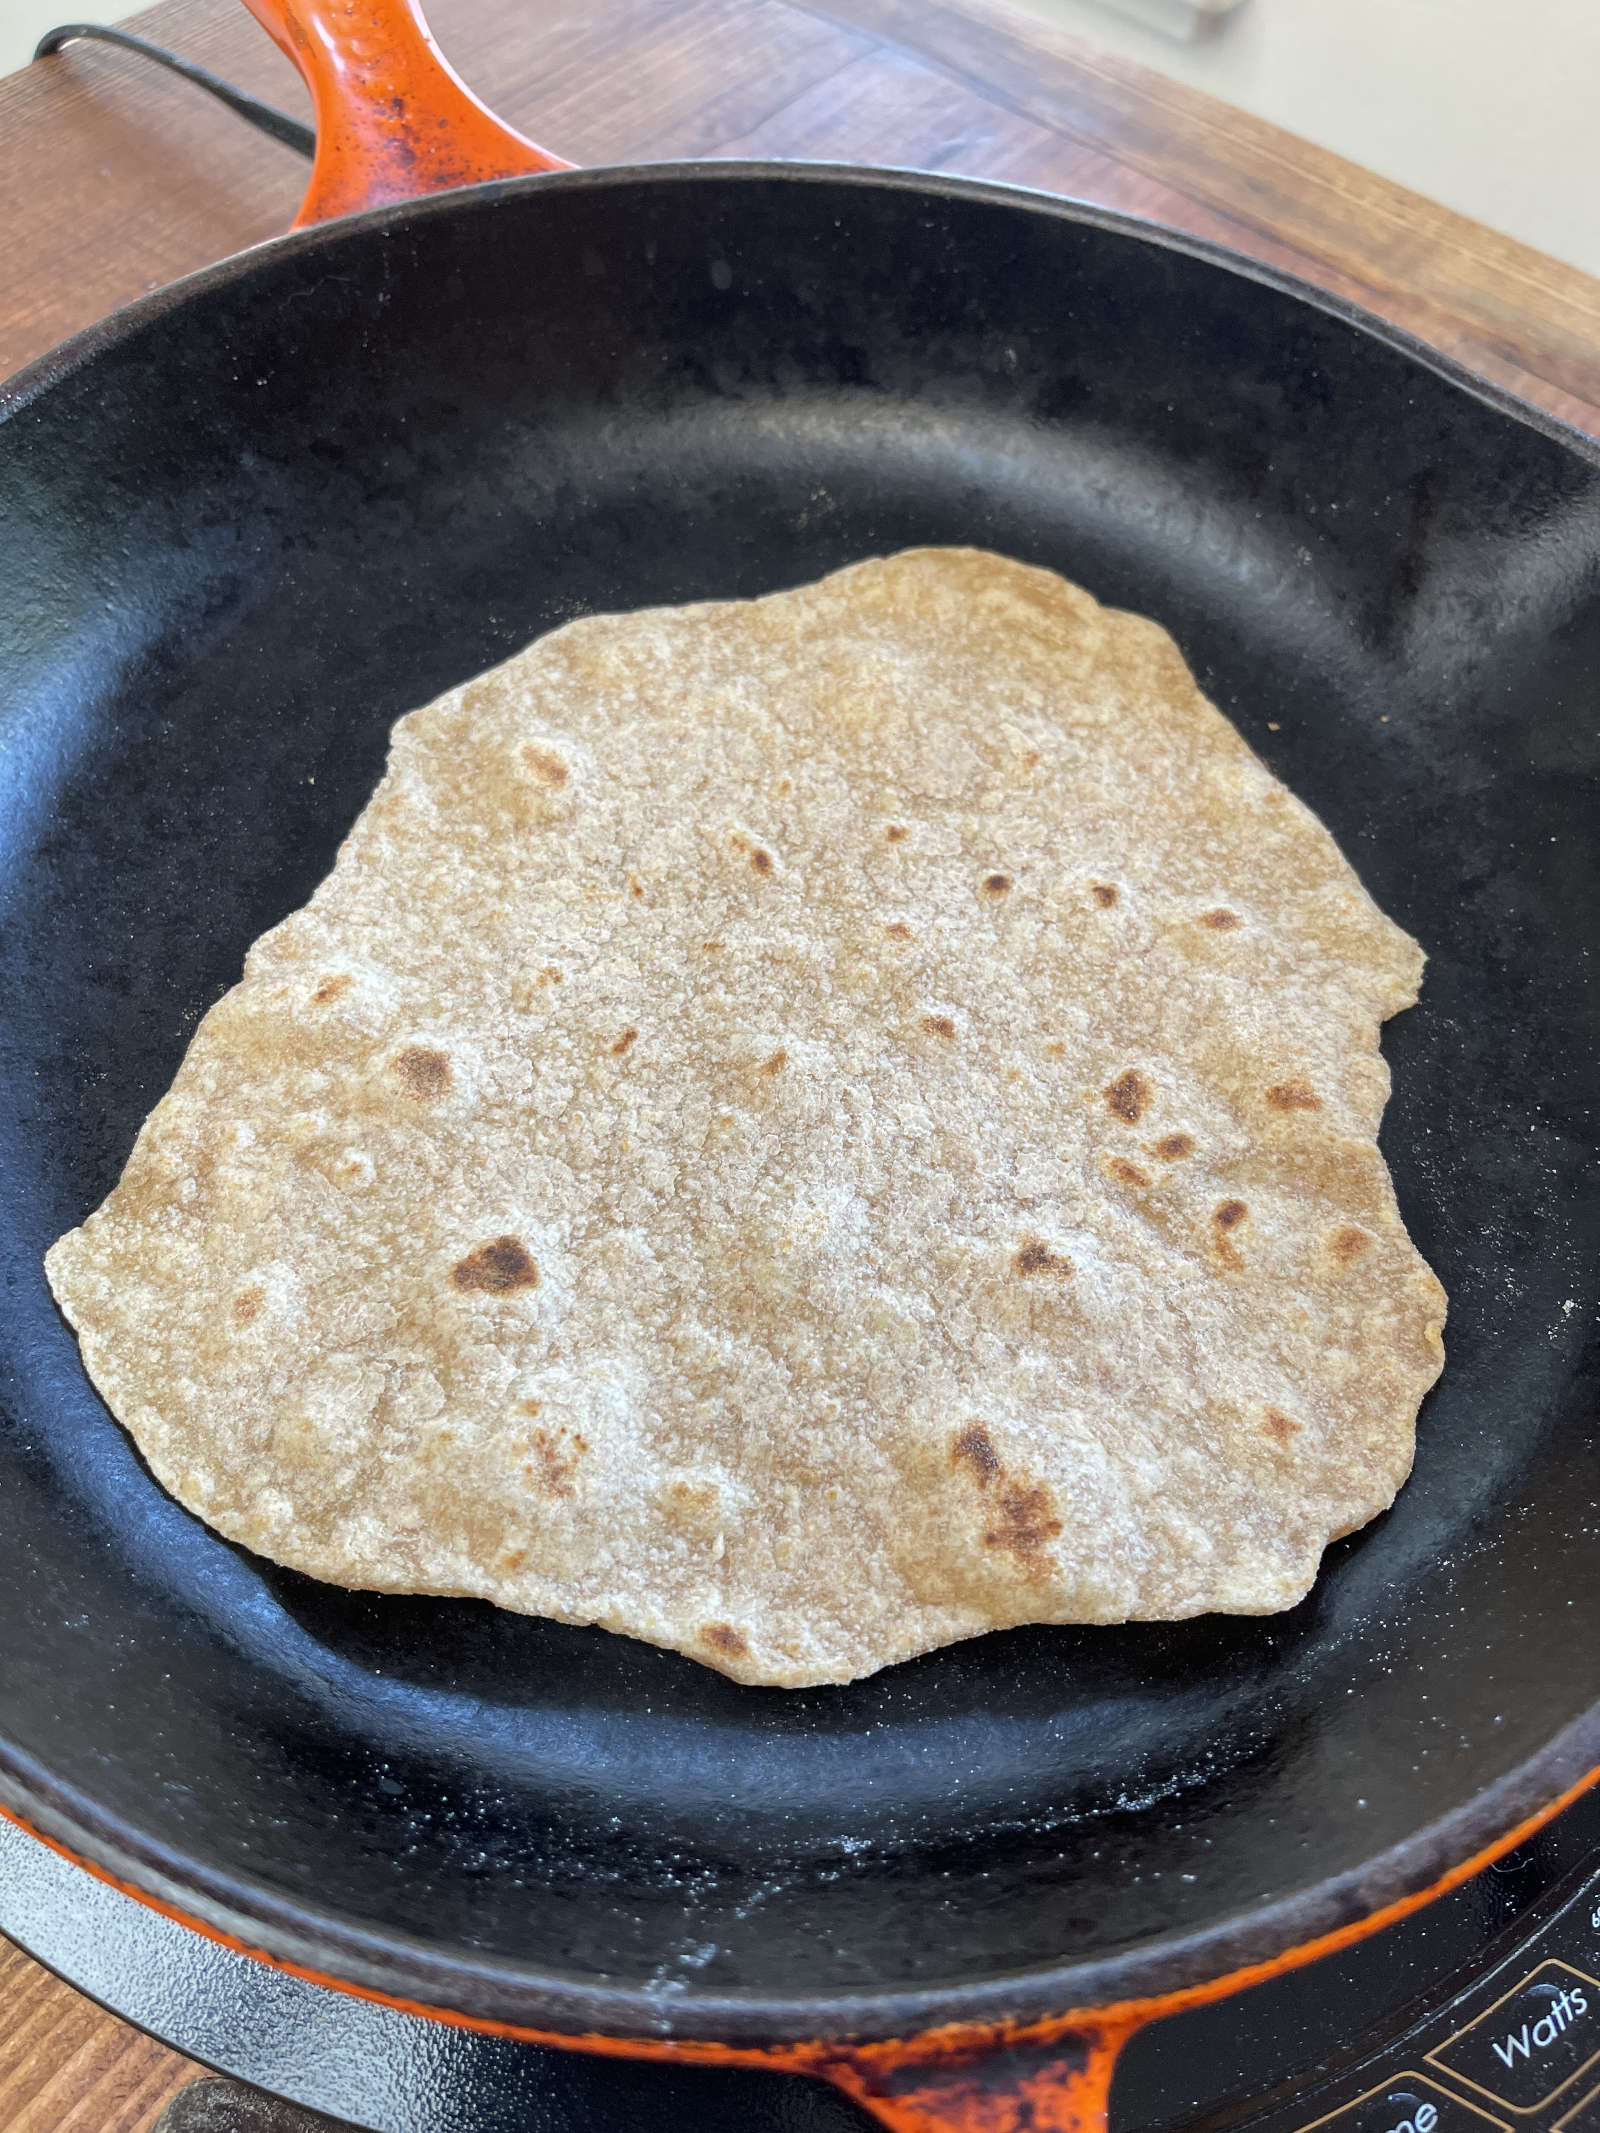 A flipped wheat tortilla cooking in an enameled cast iron pan